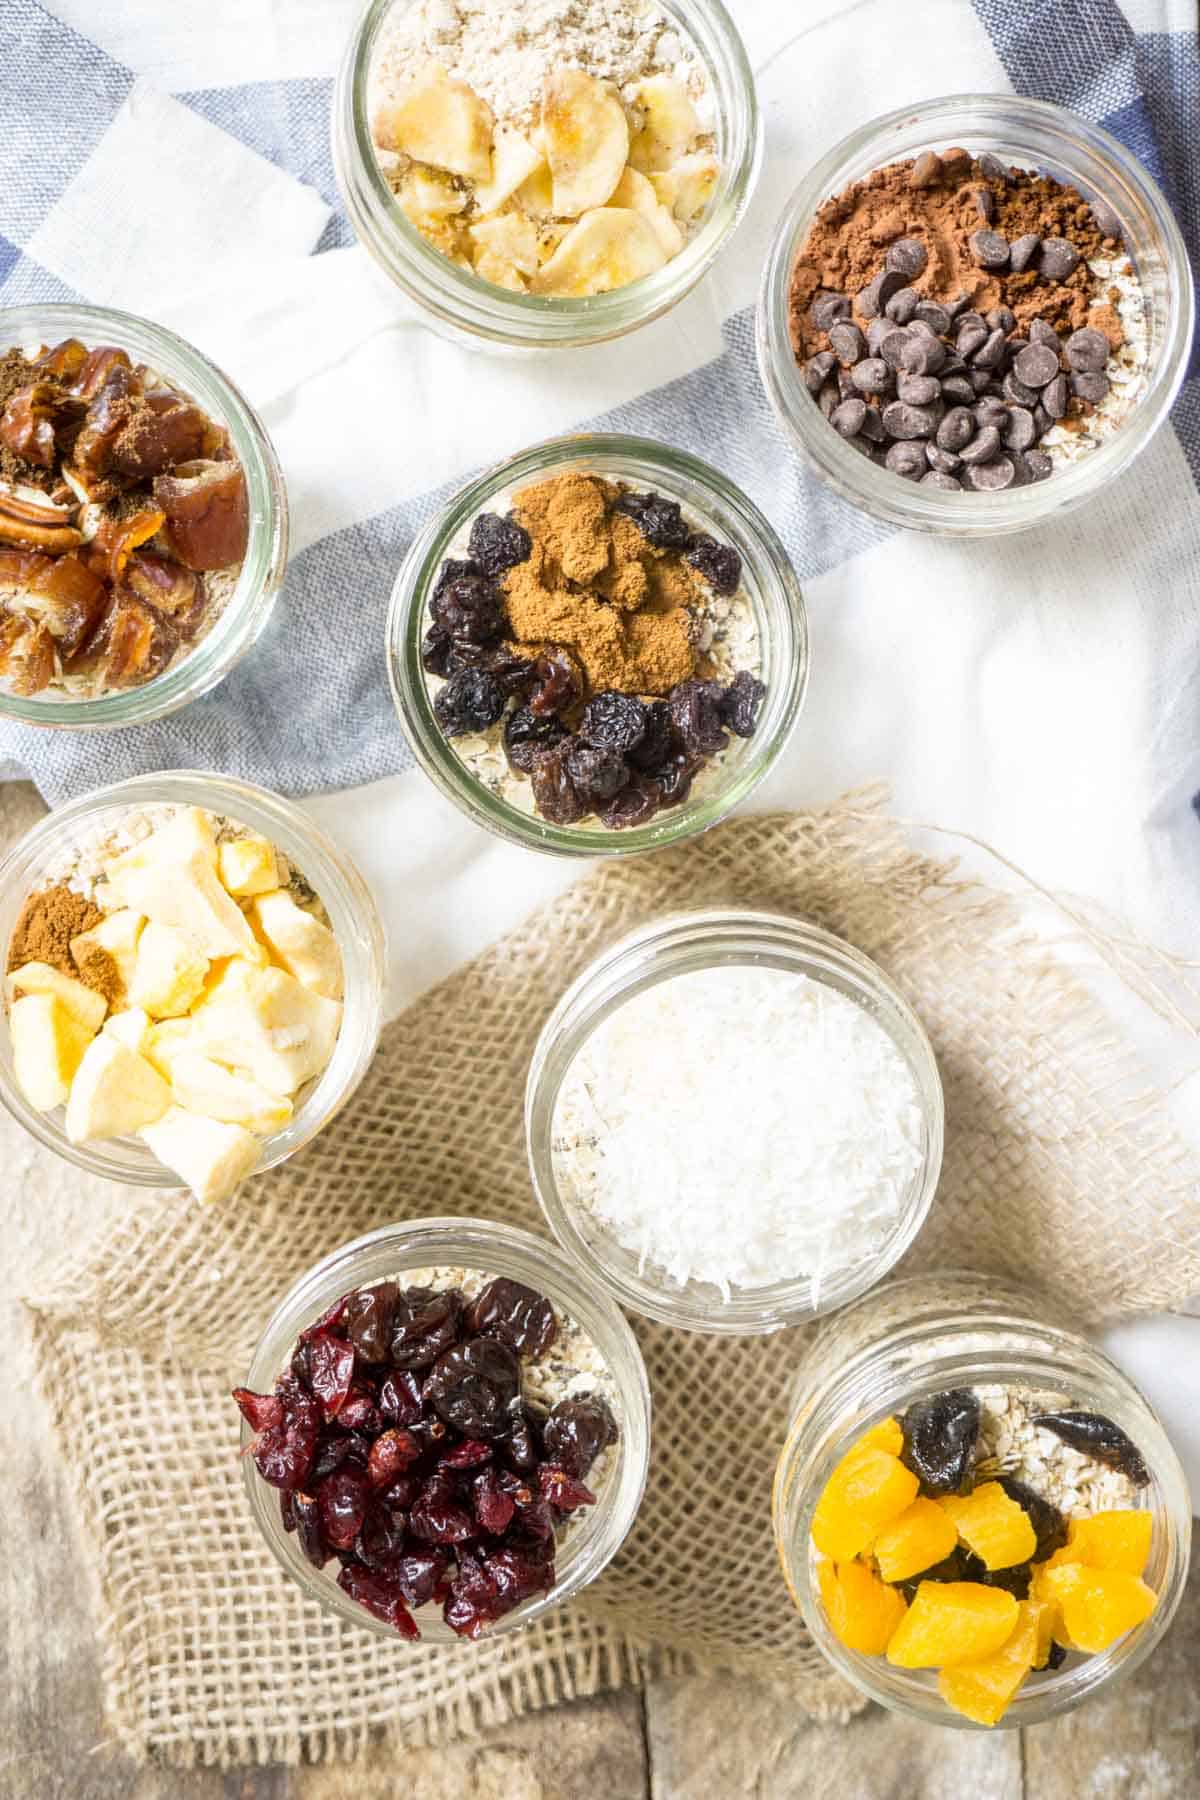 homemade instant oatmeal packets